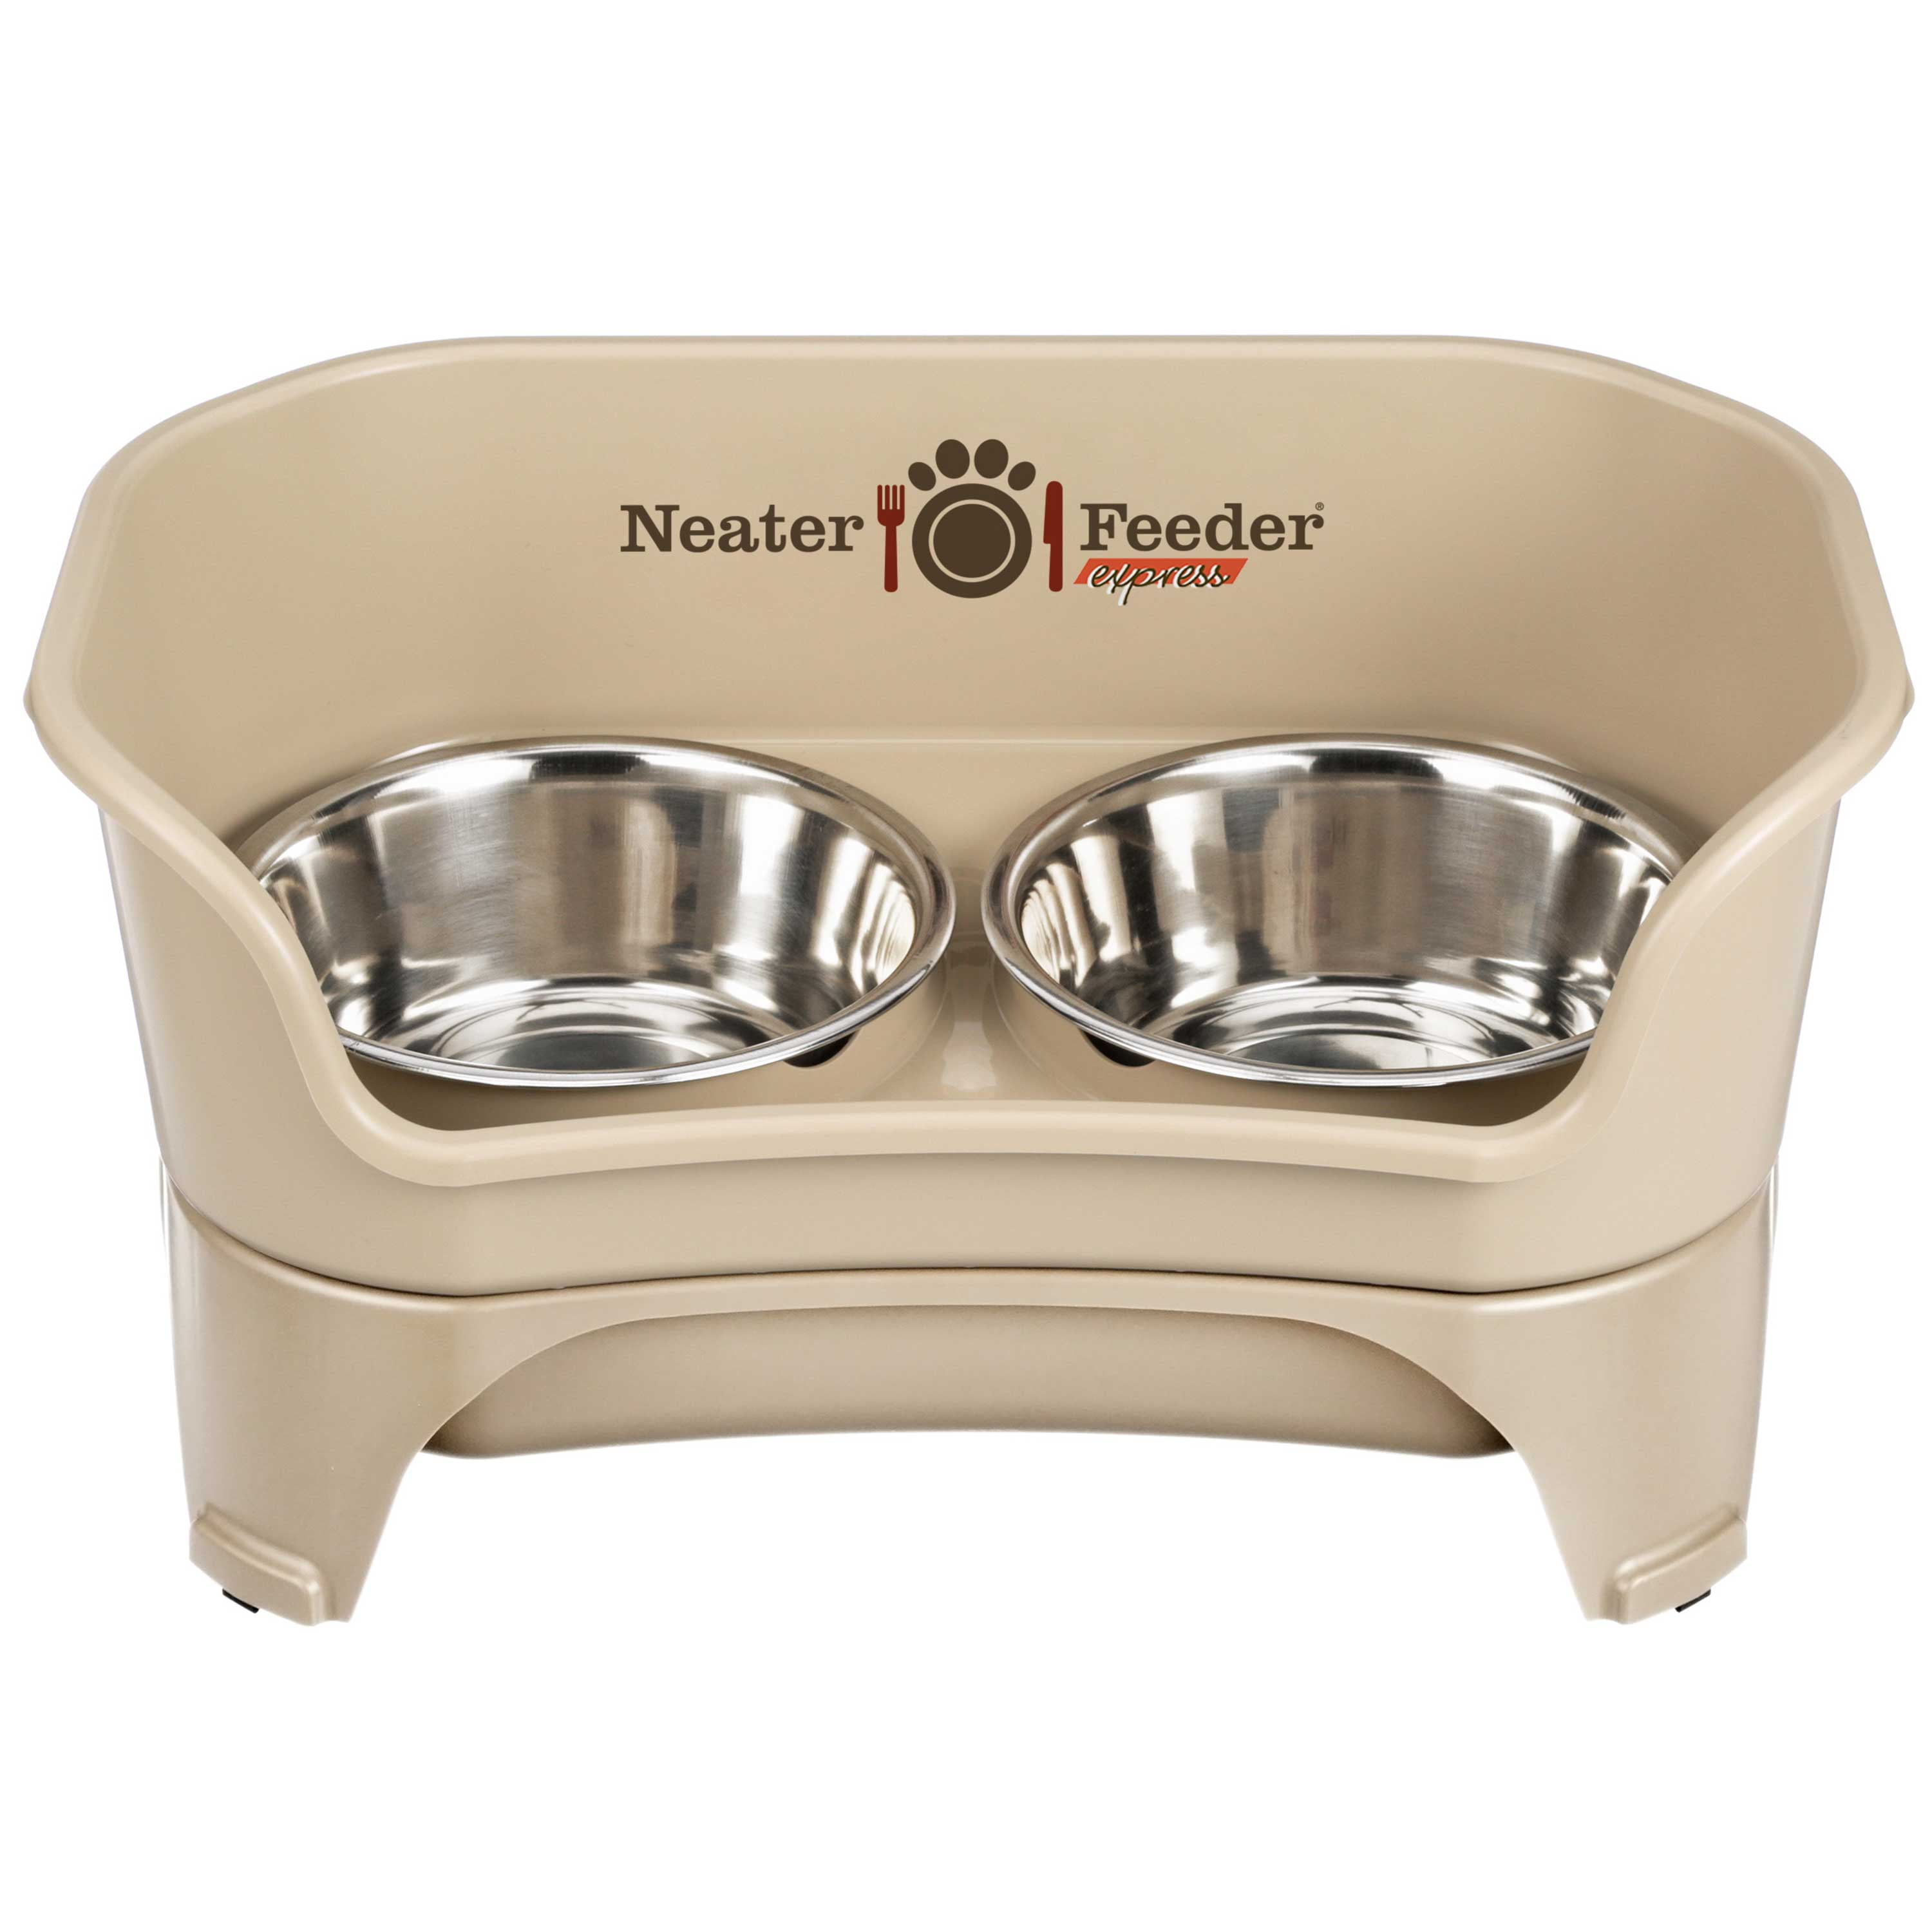 Neater Pets Big Bowl with Leg Extensions for Dogs - Raised for Feeding  Comfort - Extra Large Plastic Trough Style Food or Water Bowl for Use  Indoors or Outdoors, Gunmetal, 1.25 Gallon (160 Oz.) 